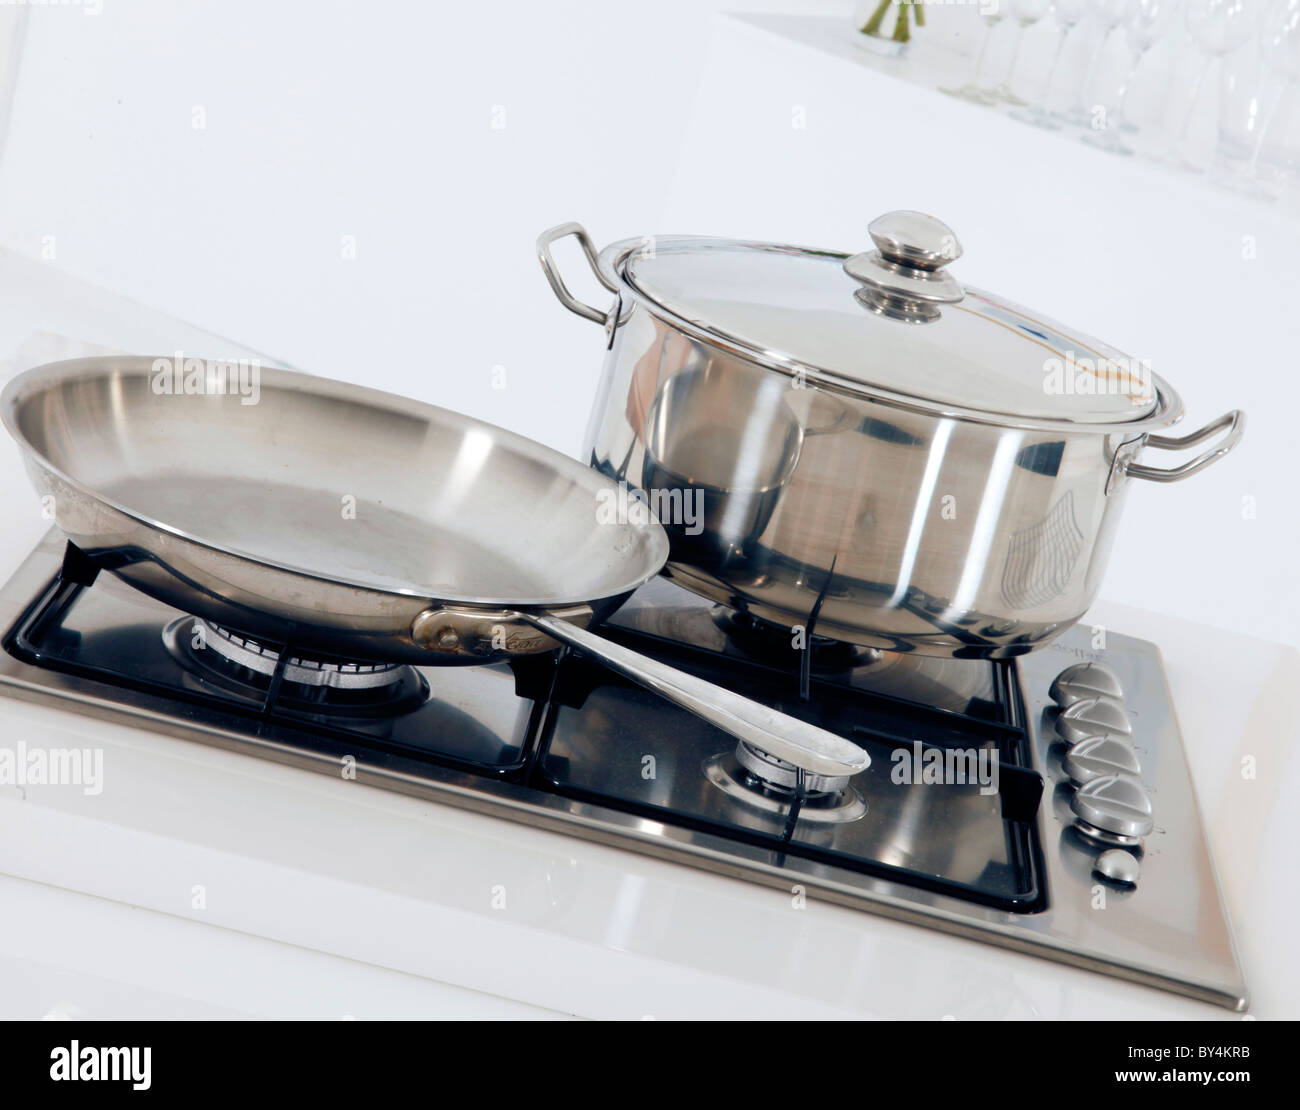 POT AND FRYING PAN ON COOKER HOB Stock Photo